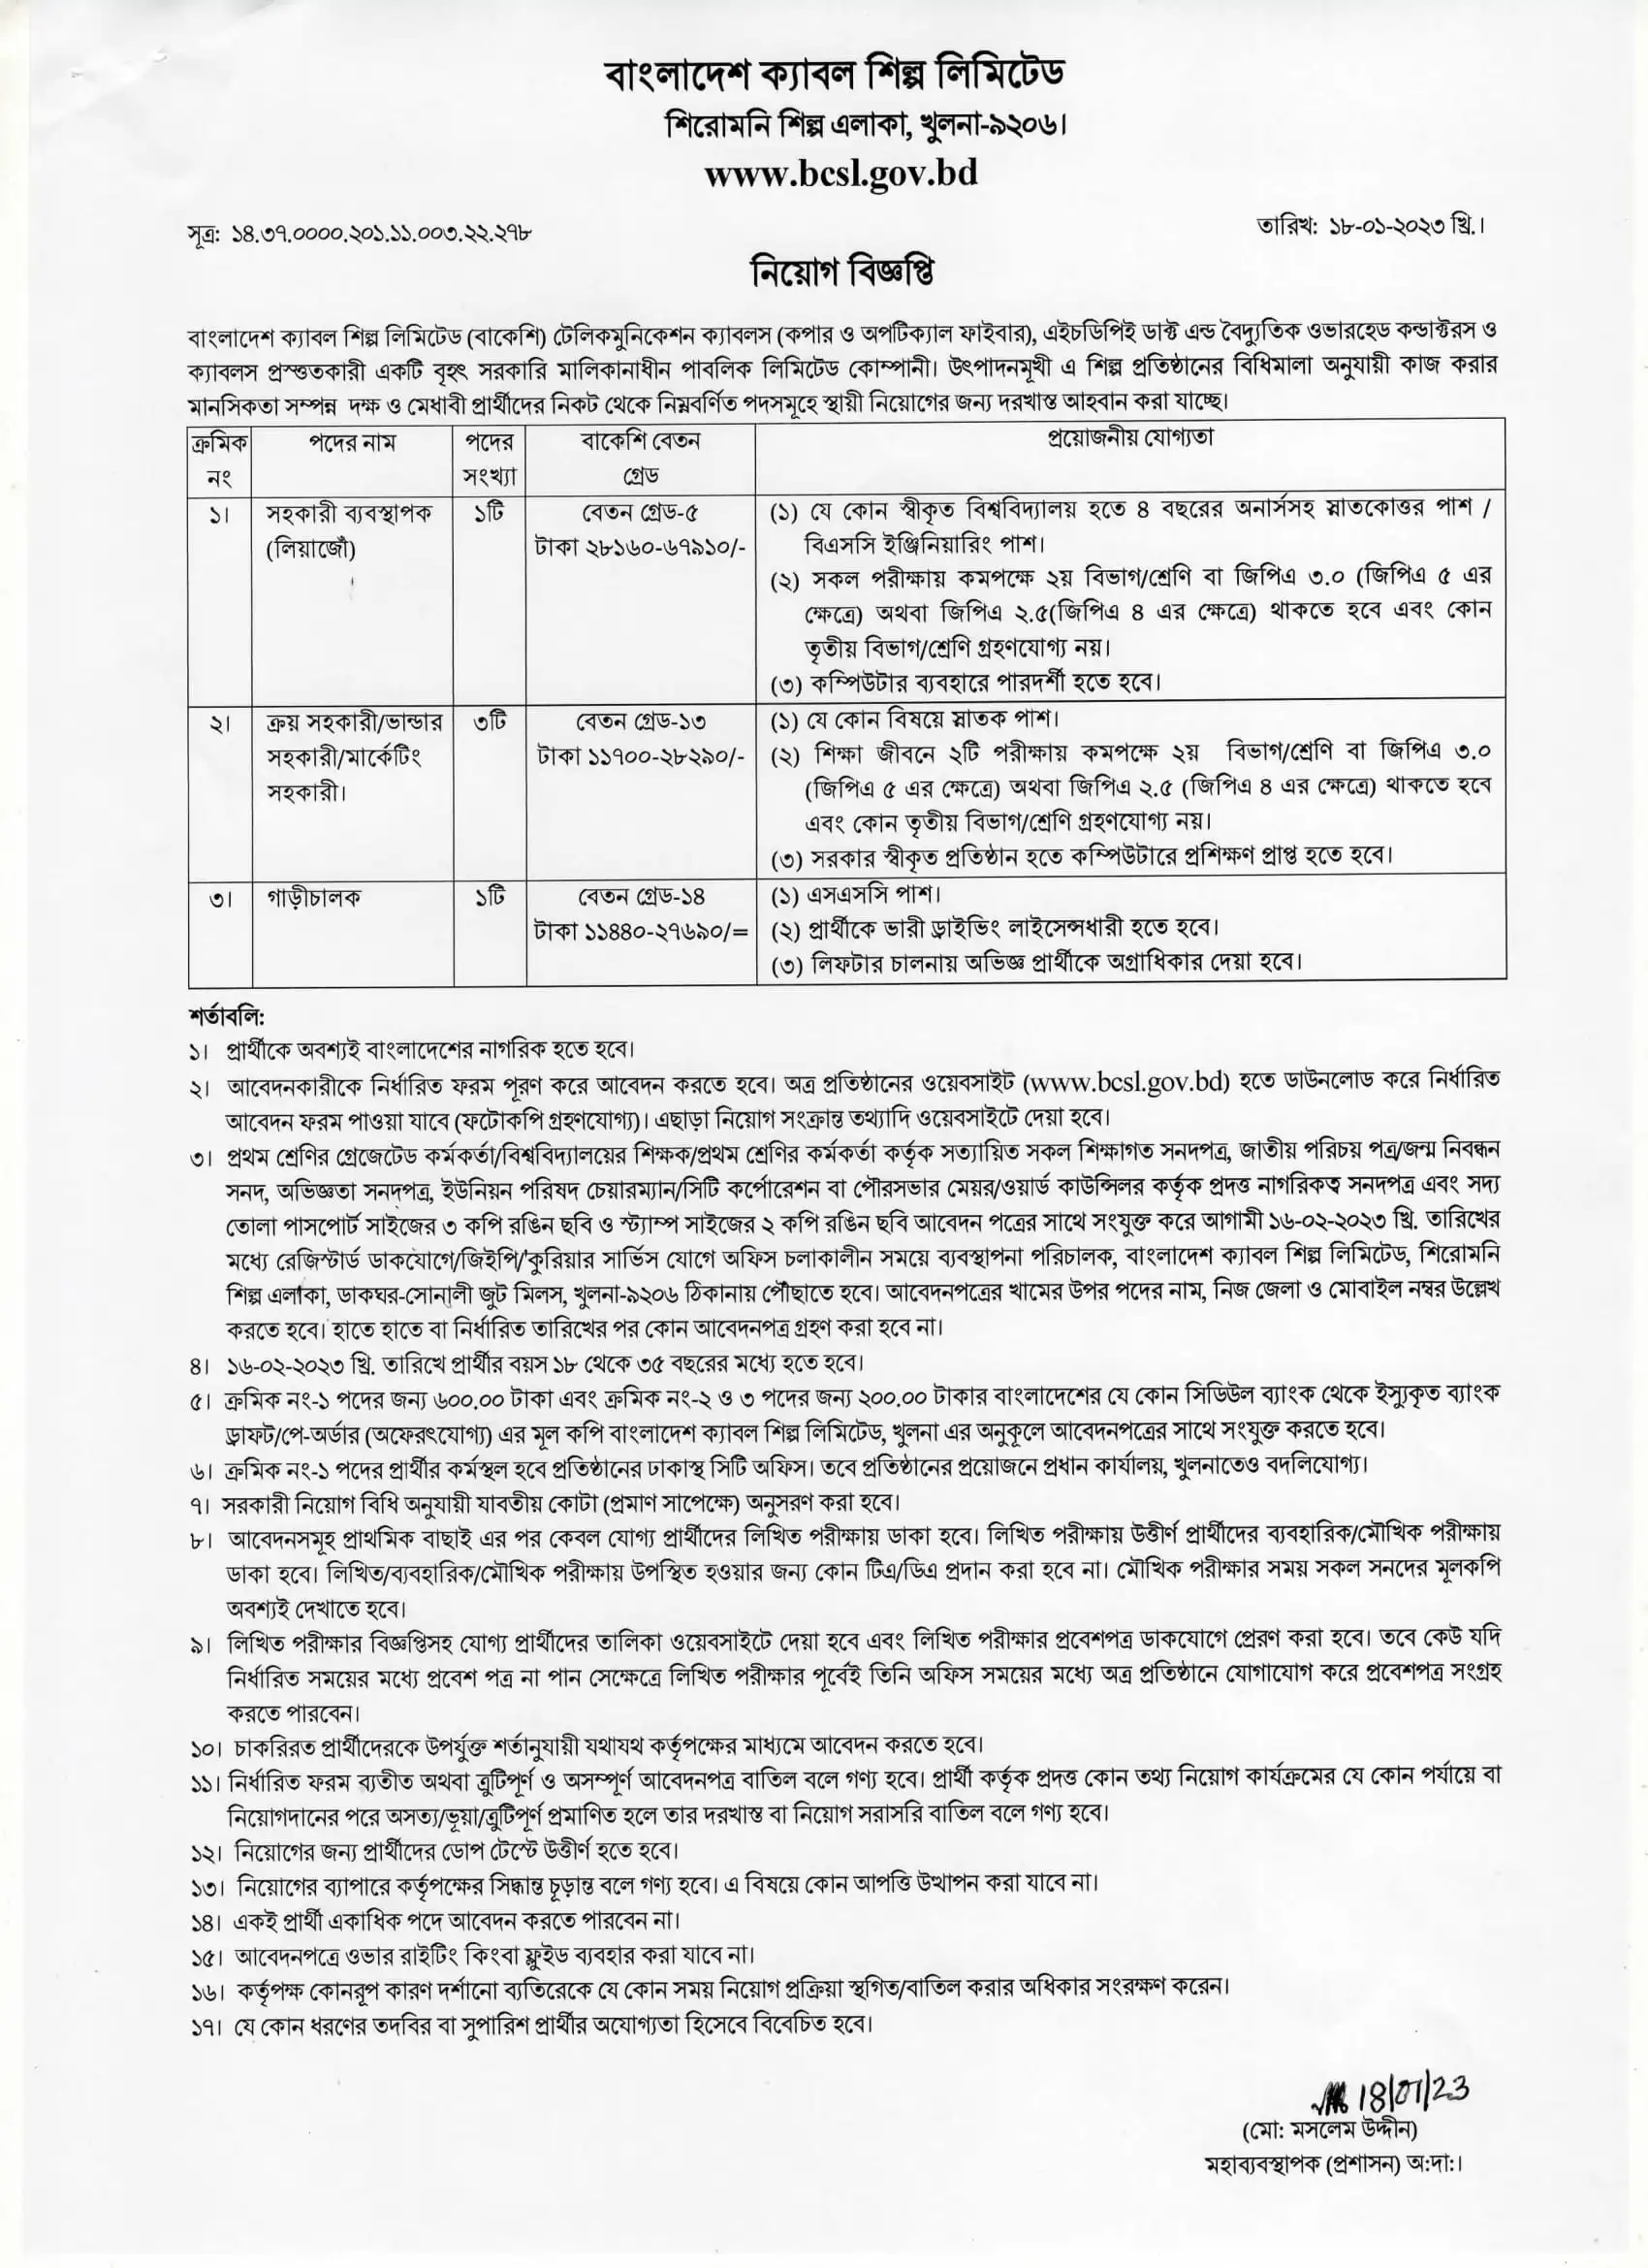 Bangladesh Cable Industries Limited (BCSL) new recruitment circular published on 18 January 2023